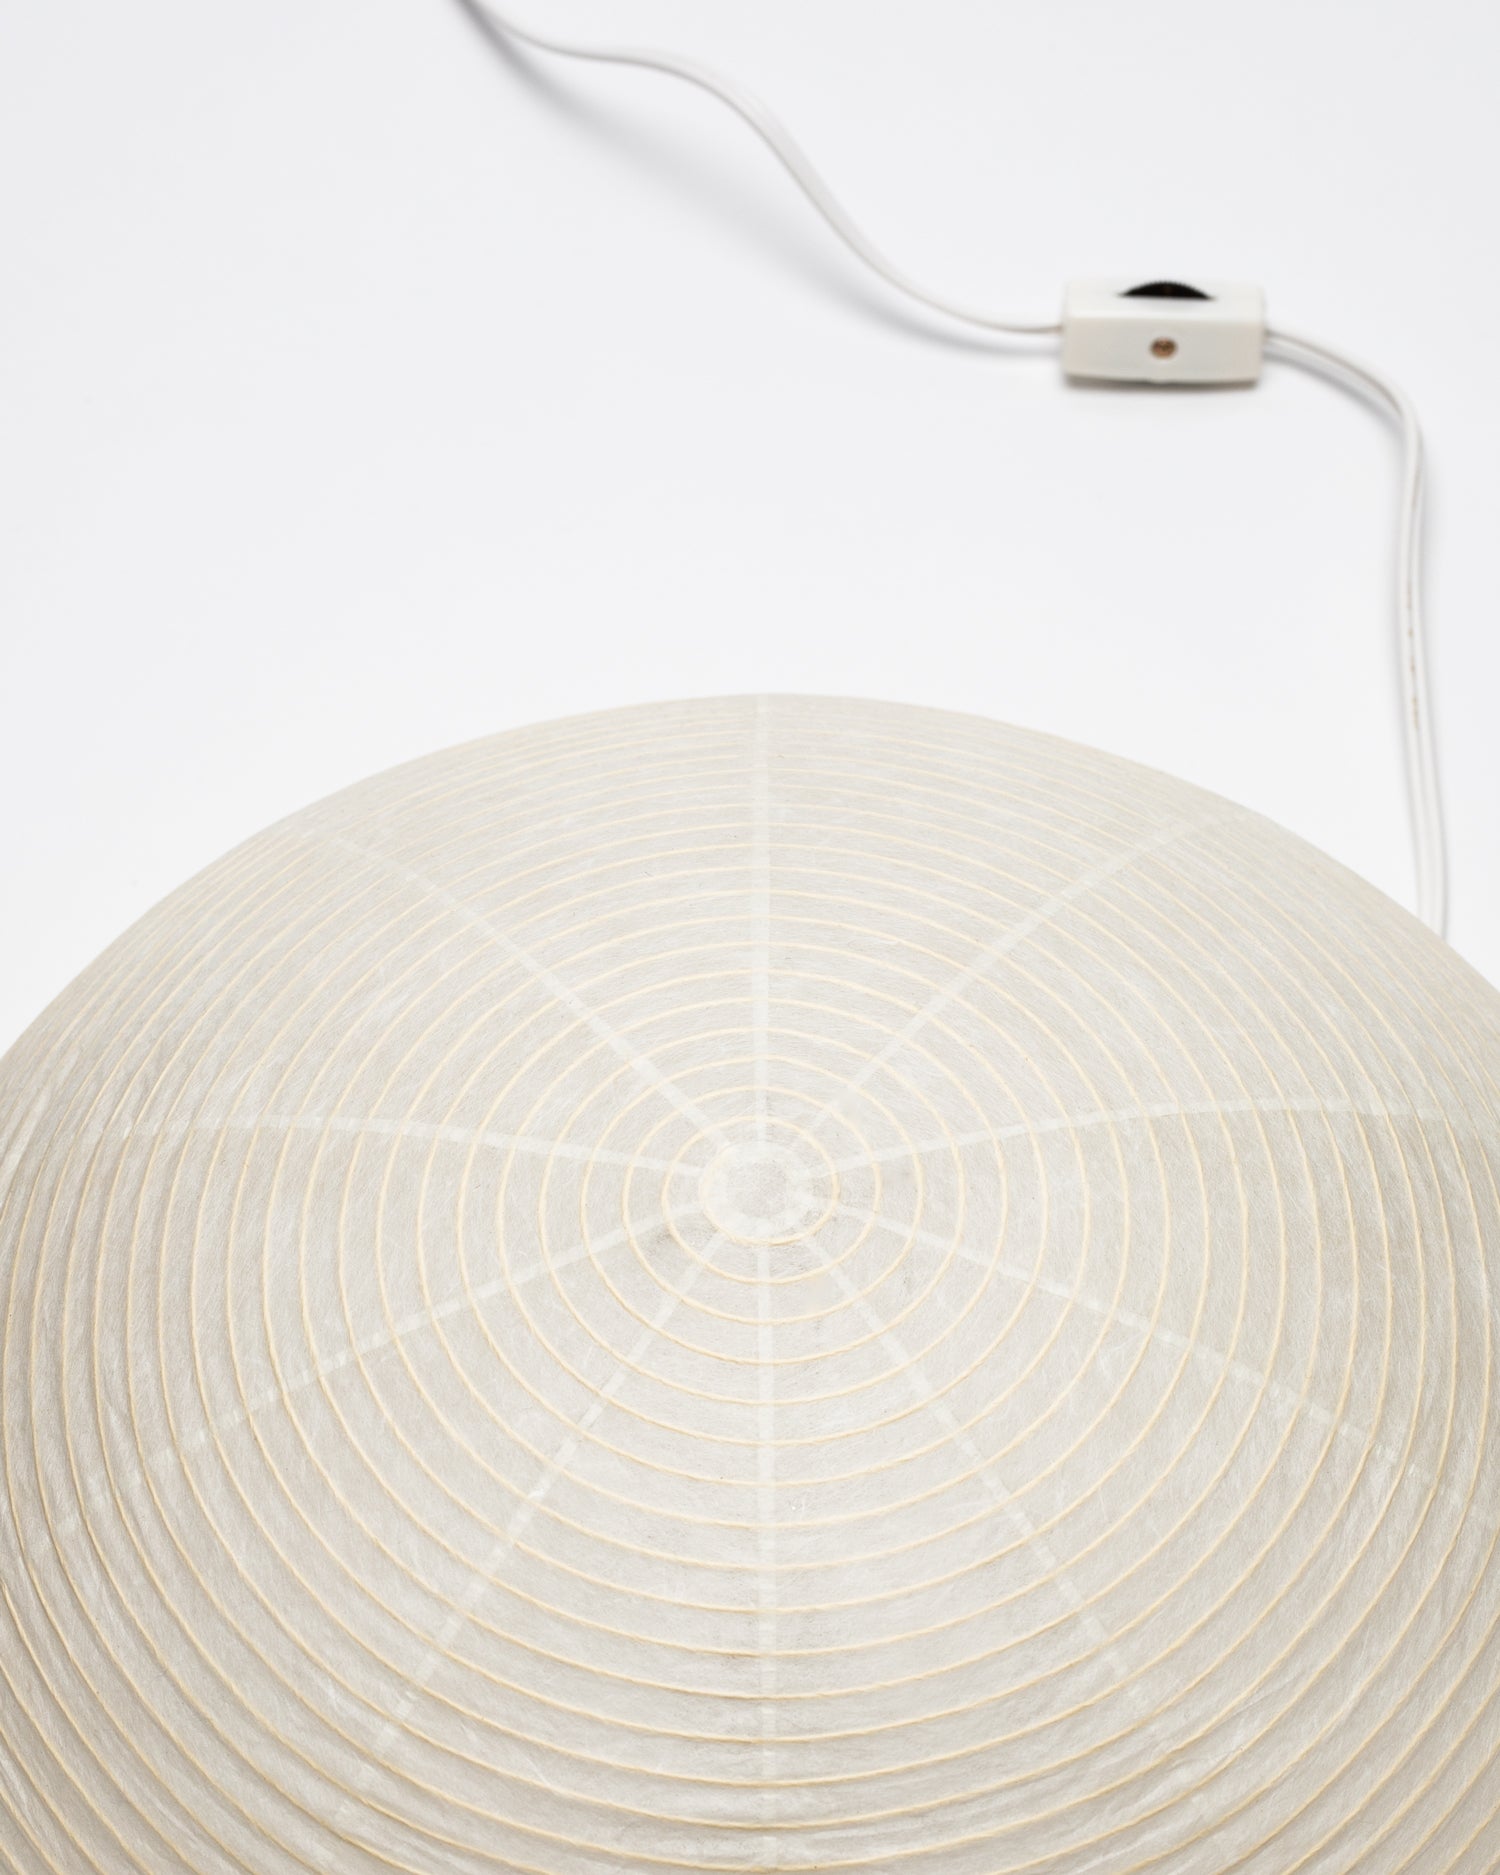 Paper Moon Lamp 04 - The Saucer